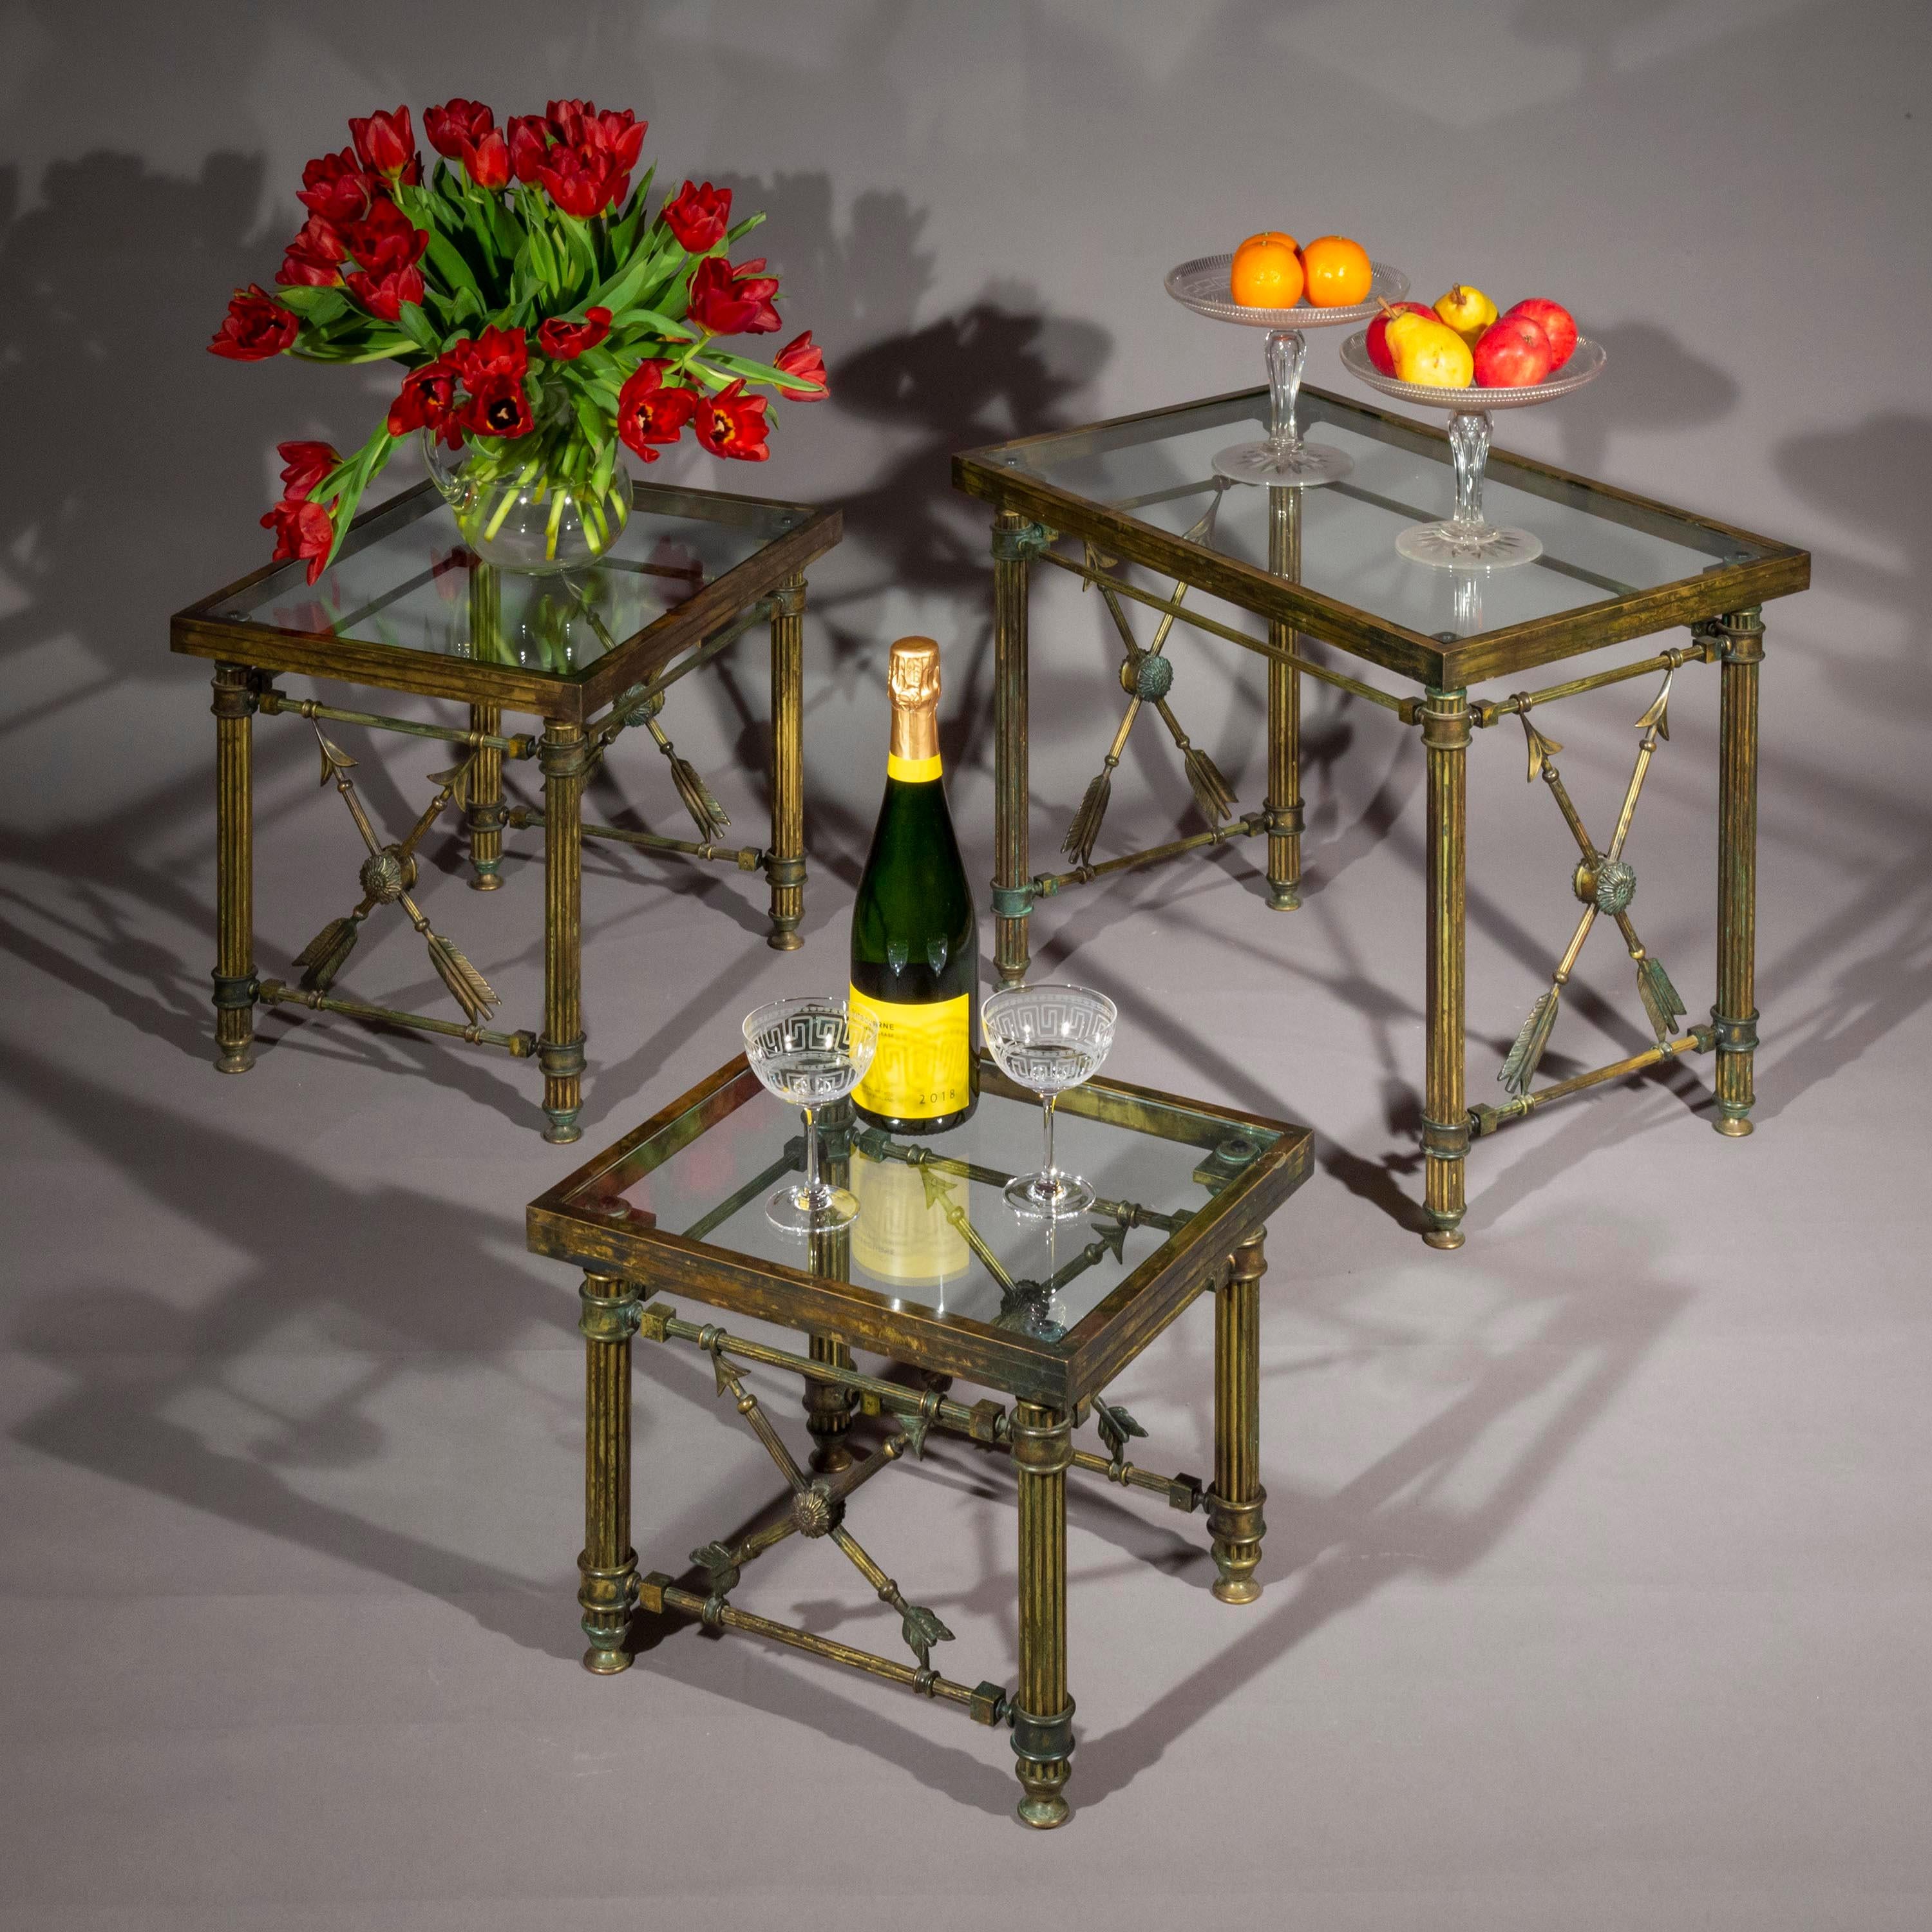 A superb quality graduated set of three solid bronze cocktail tables of 'Pompeian' style, decorated with Cupid's arrows
France, mid-20th century.

Why we like them
An impossibly chic set of low tables to up your cocktail game. Timeless classical